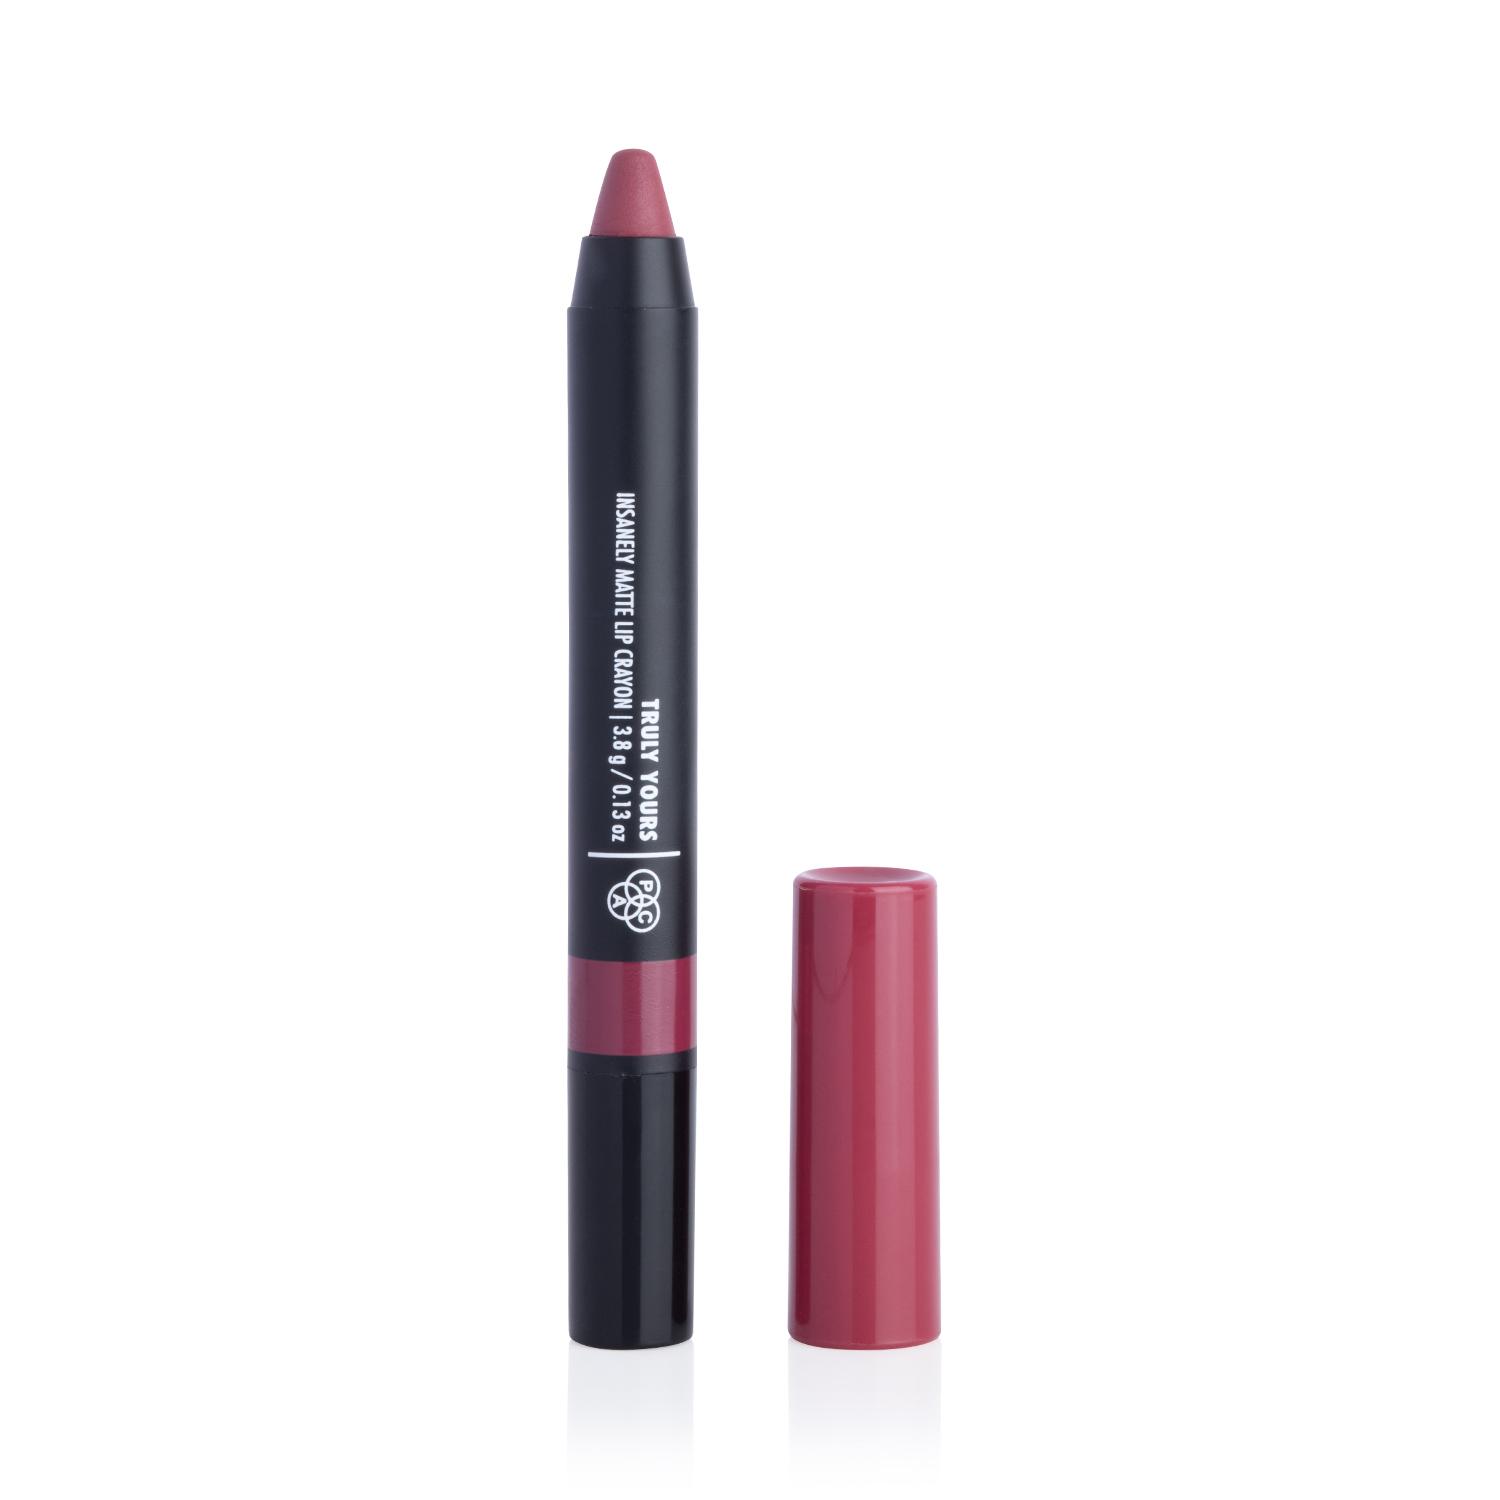 PAC | PAC Insanely Matte Lip Crayon - Truly Yours (3.8g)